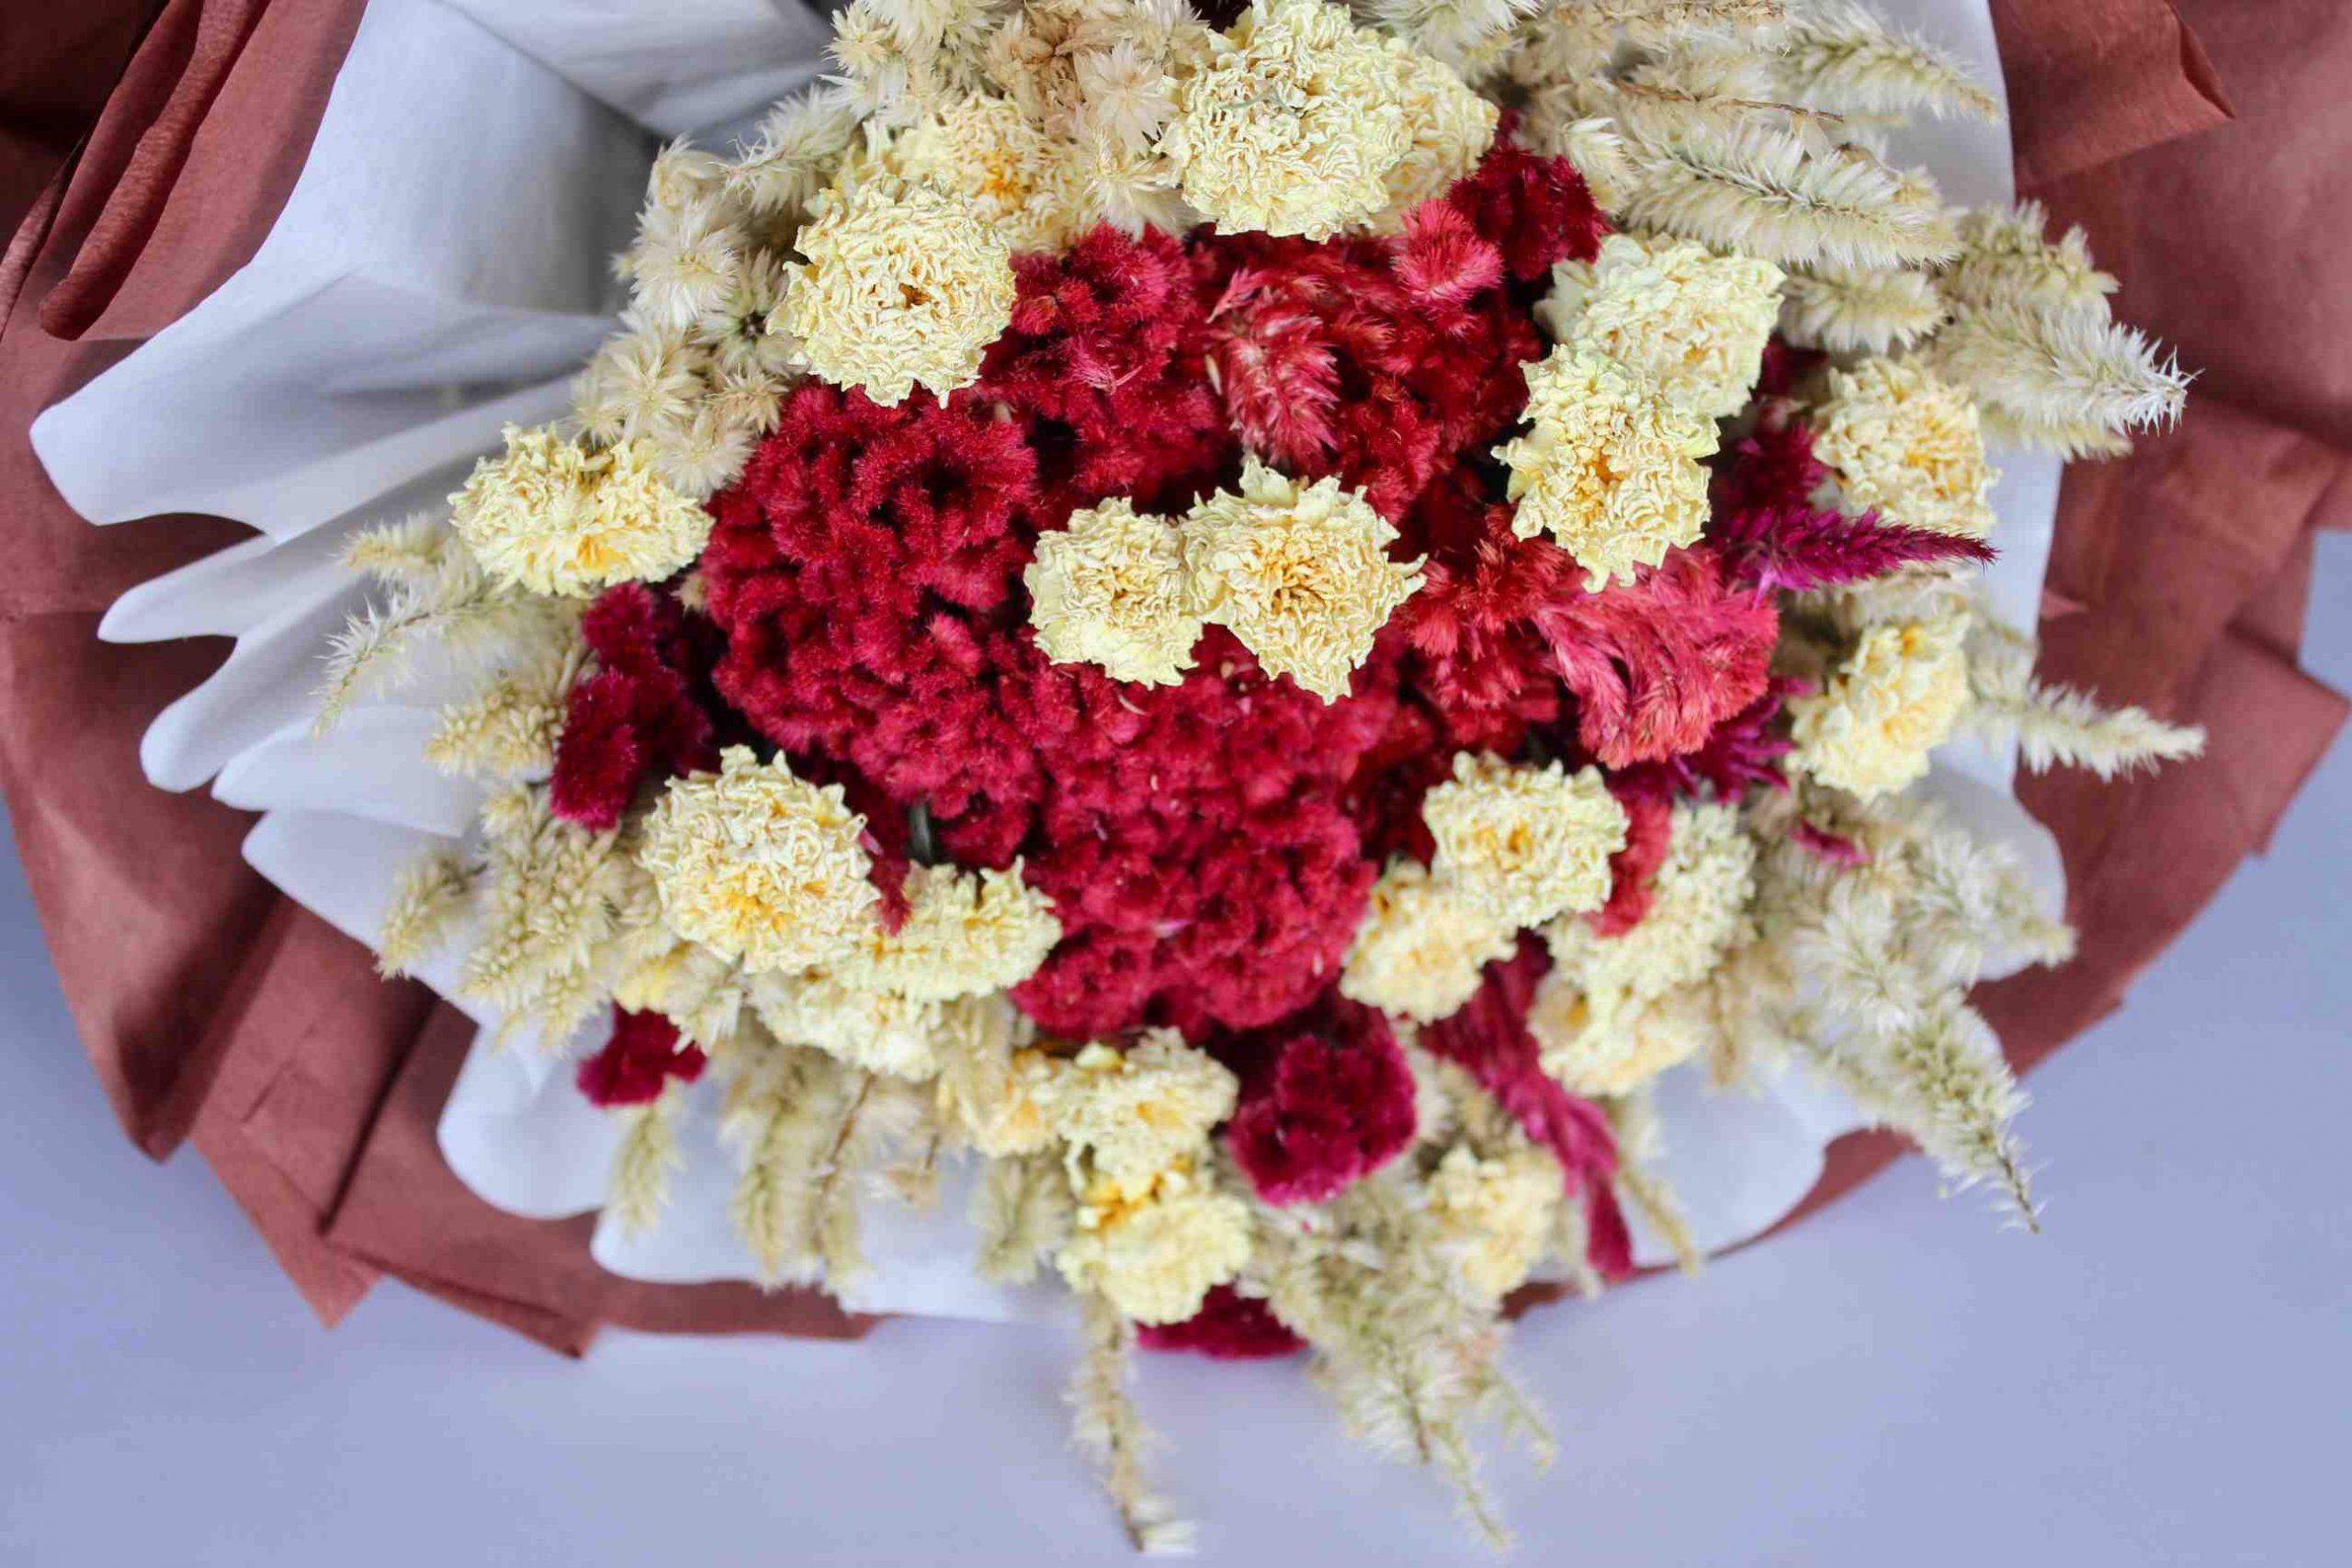 Natural Dry Flowers Bouquet Handmade Dried Flower Bouquet, Gift Box Packaging, Birthday Valentine's Day Gifts, Size: 24